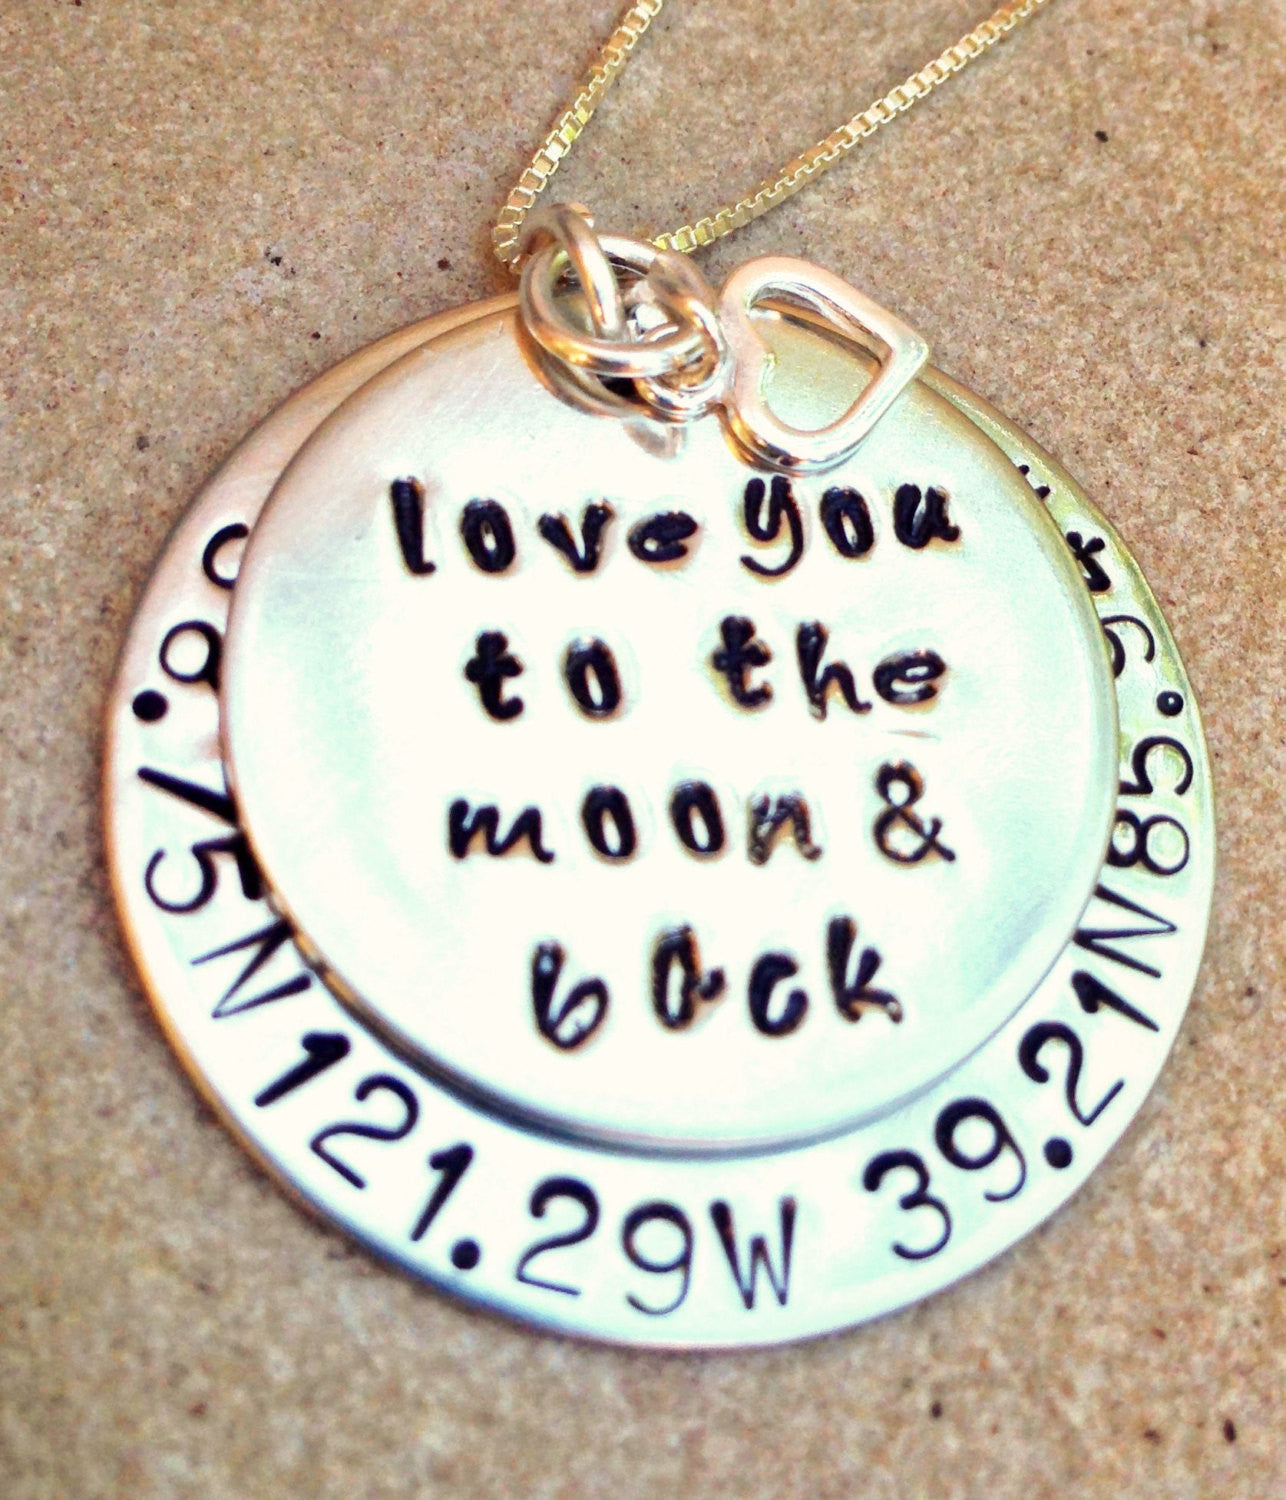 Love You To The Moon And Back Coordinate Necklace - Natashaaloha, jewelry, bracelets, necklace, keychains, fishing lures, gifts for men, charms, personalized, 